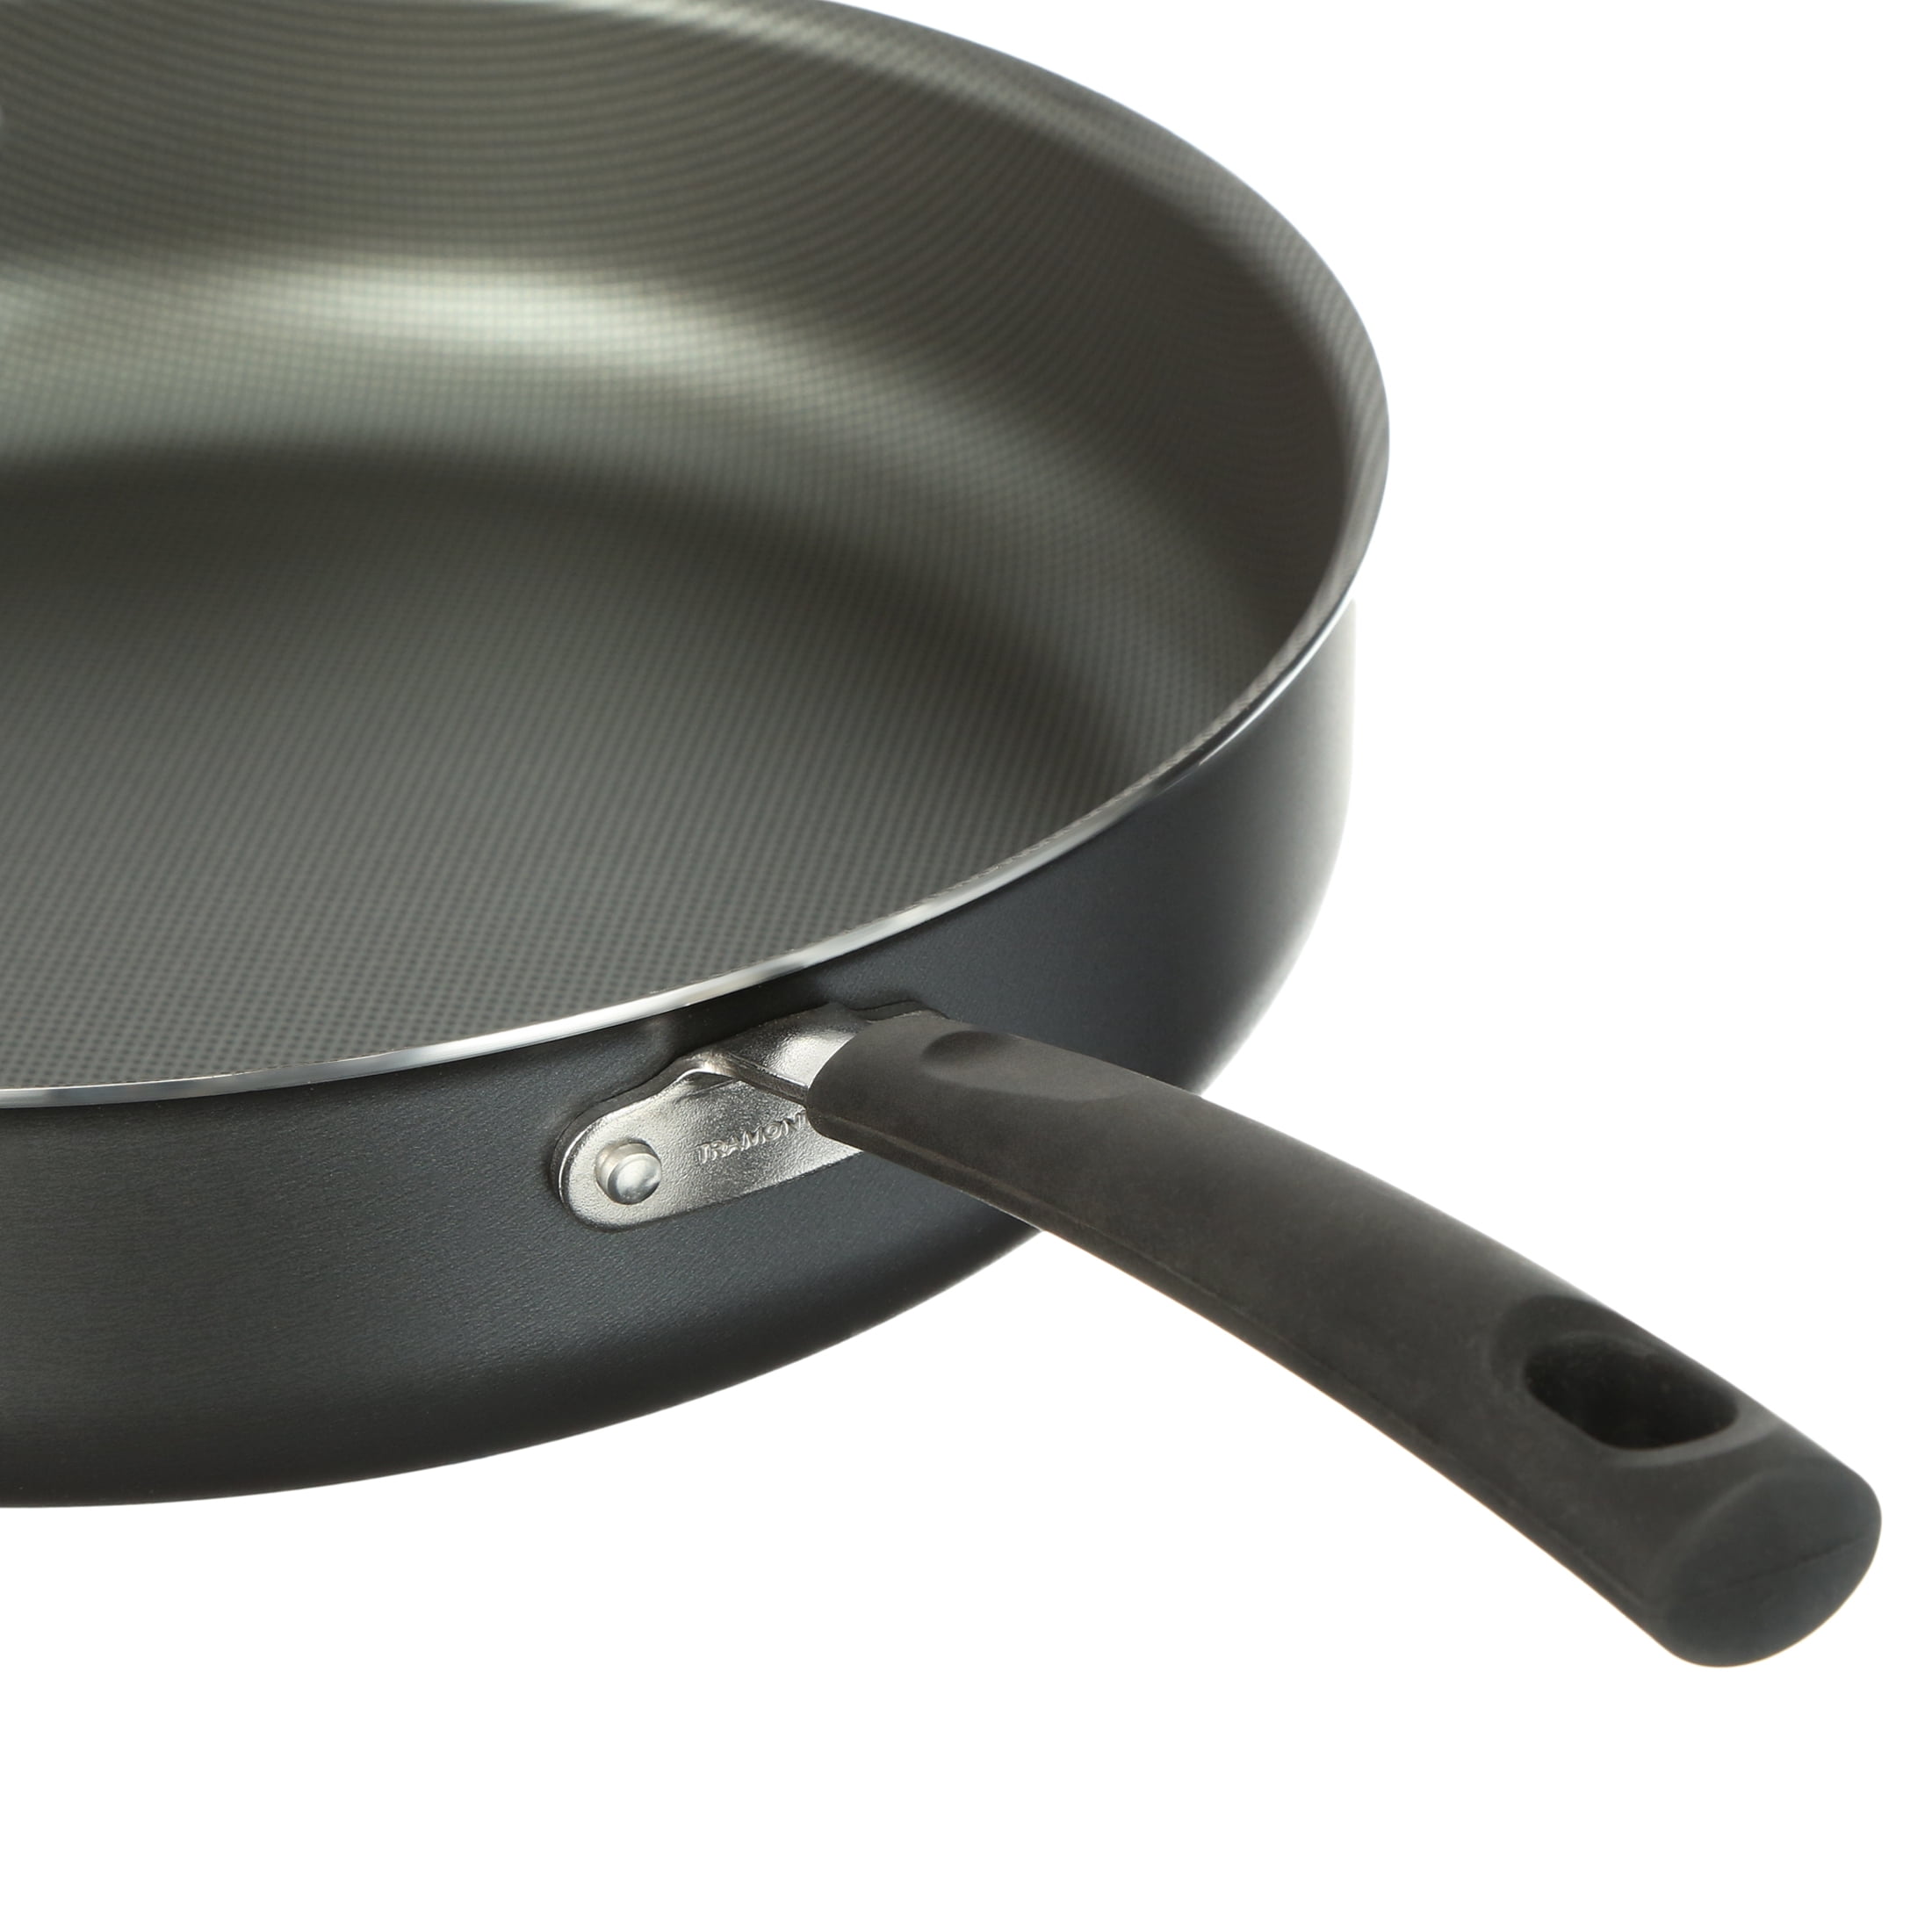 5 Qt Prima Stainless Steel Covered Deep Sauté Pan - Tramontina US